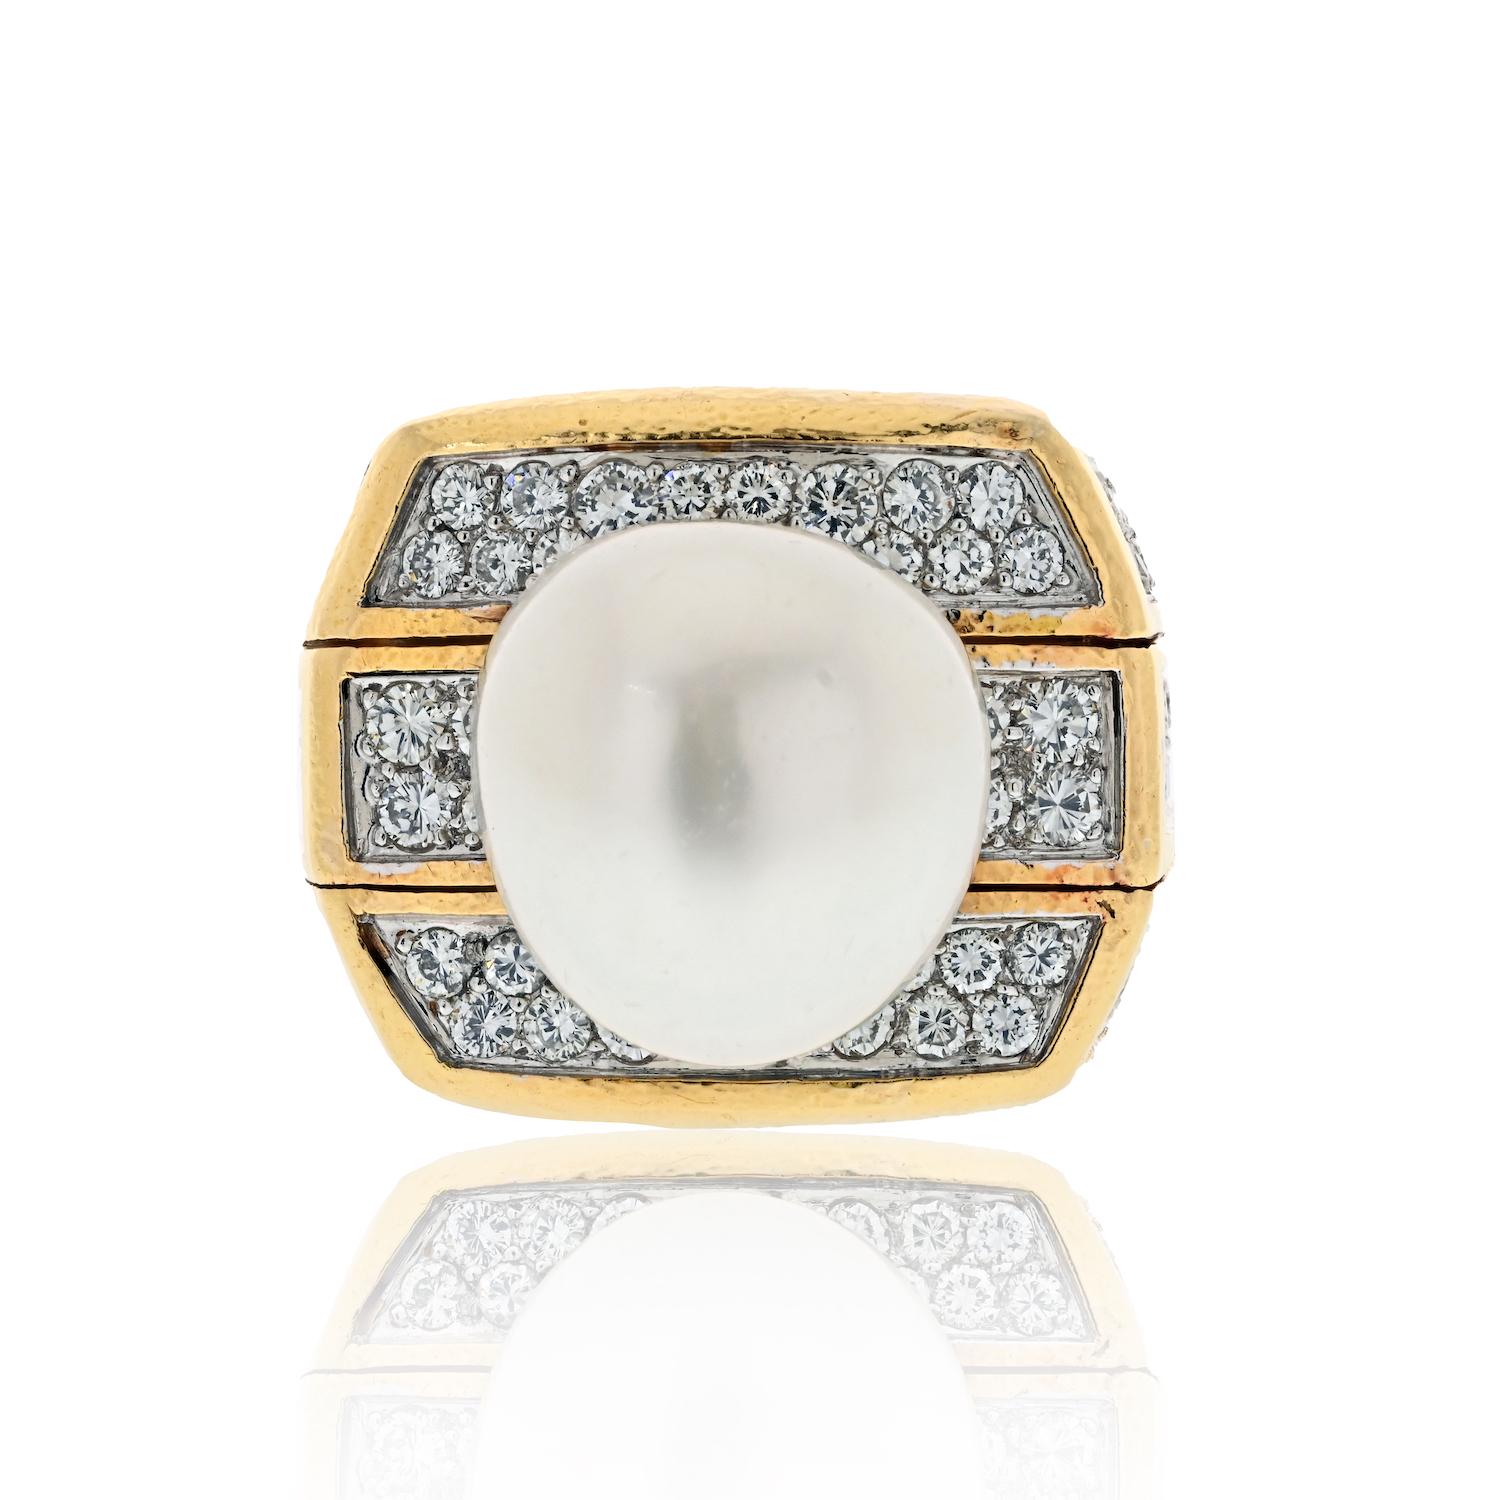 Absolutely exquisite is the only way to describe this estate David Webb Platinum & 18K Yellow Gold Pearl And Diamond Ring. With a captivating combination of 9.00 carats of round-cut diamonds and a stunning 15mm pearl, this ring is a true